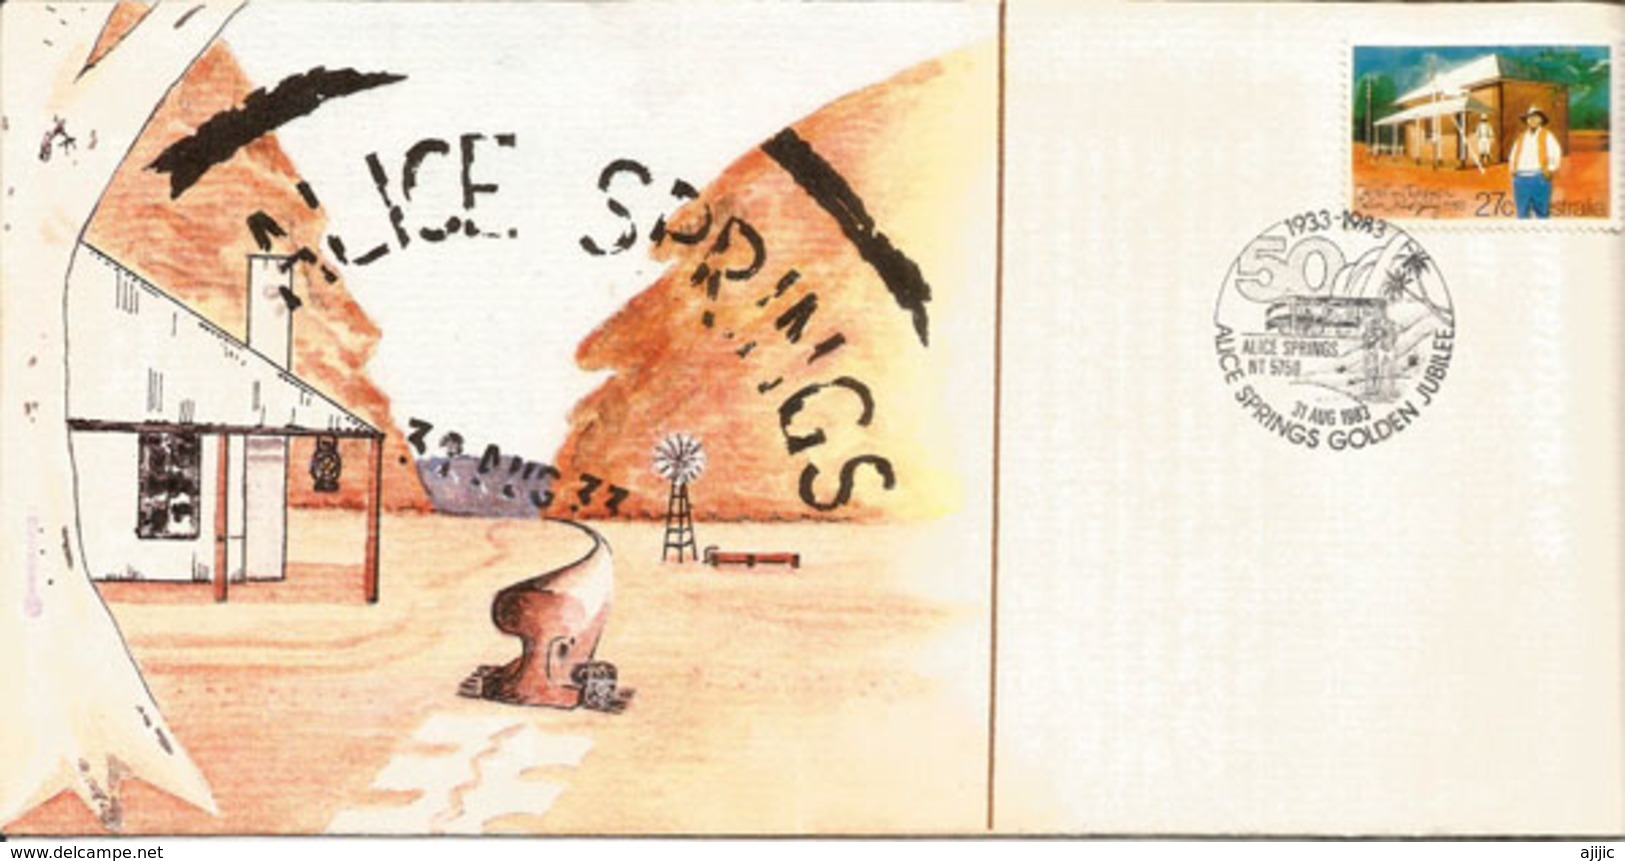 Proclamation Of Changing The Name From Stuart To Alice Springs 31 Aug.1933.Golden Jubilee, Special Cover - Alice Springs